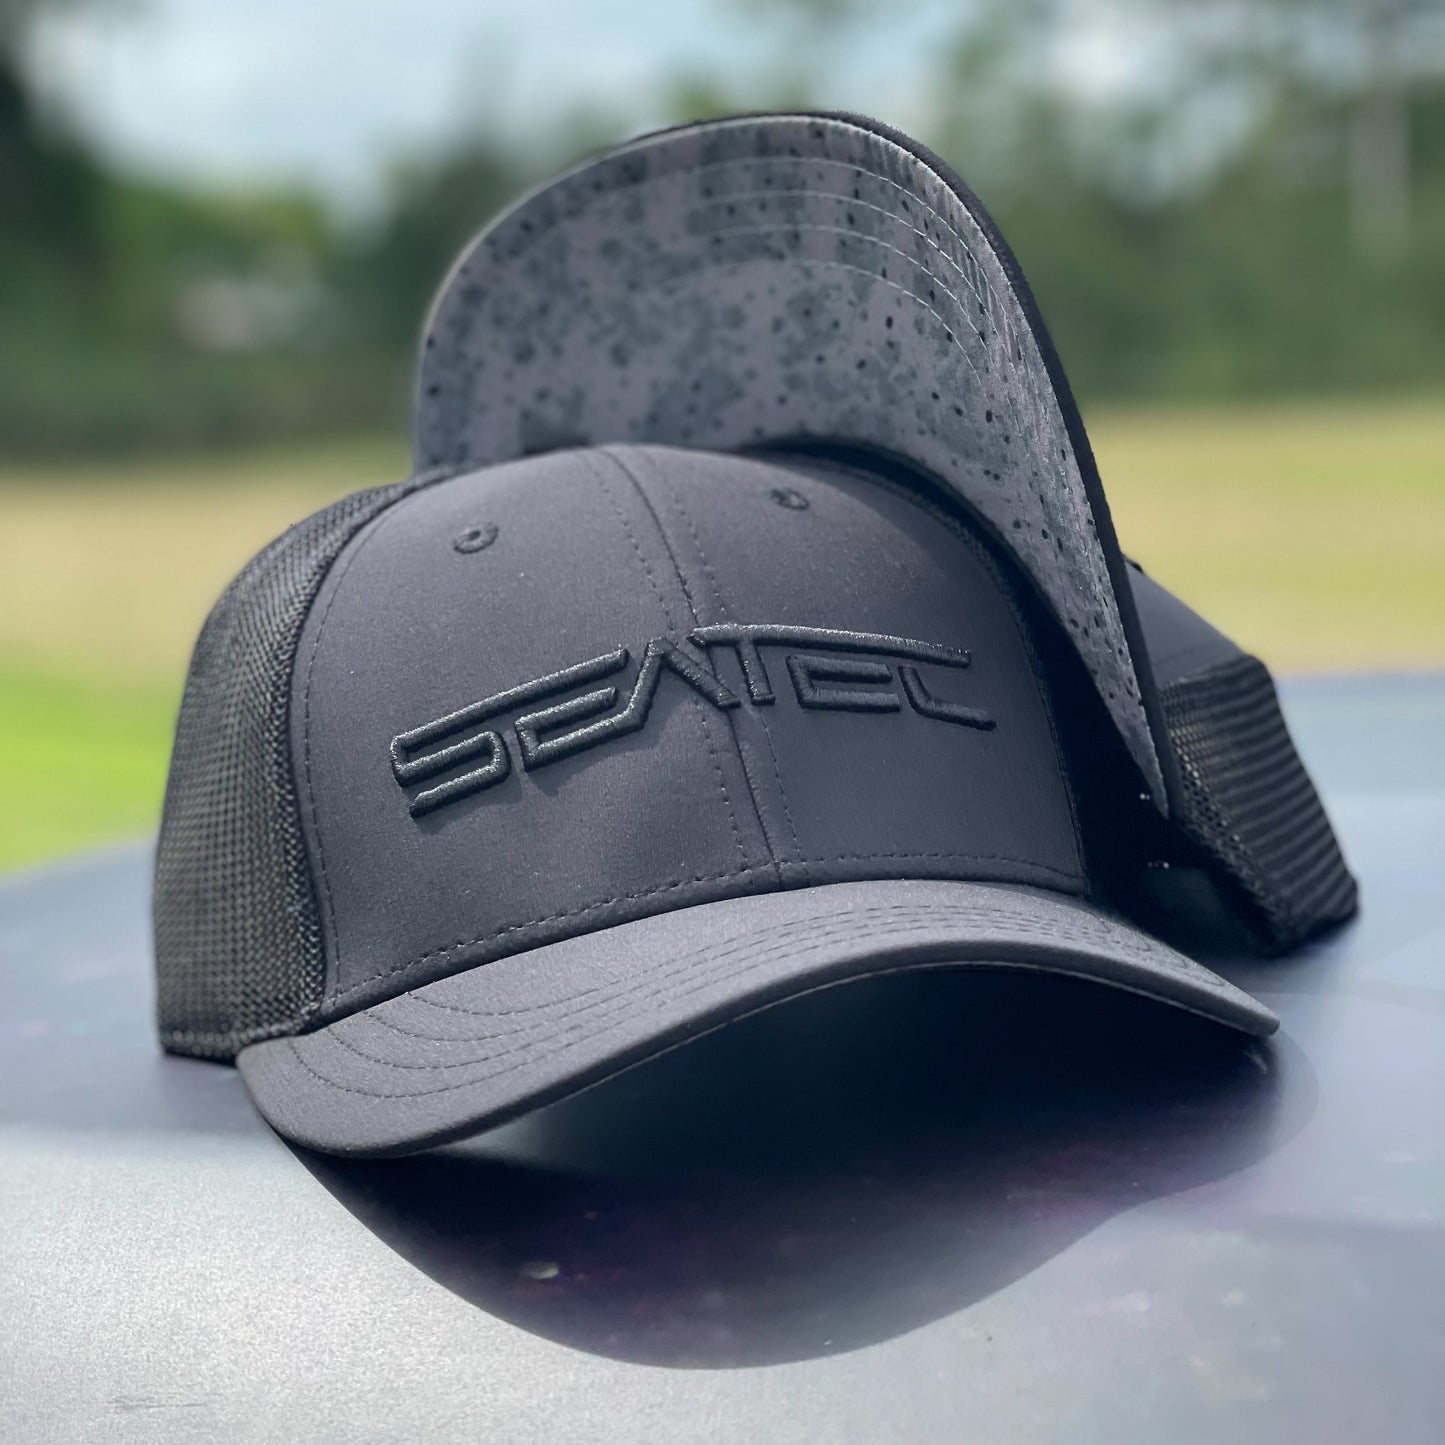 Seatec Outfitters | GOLIATH | TEC MESH PERFORMANCE HAT